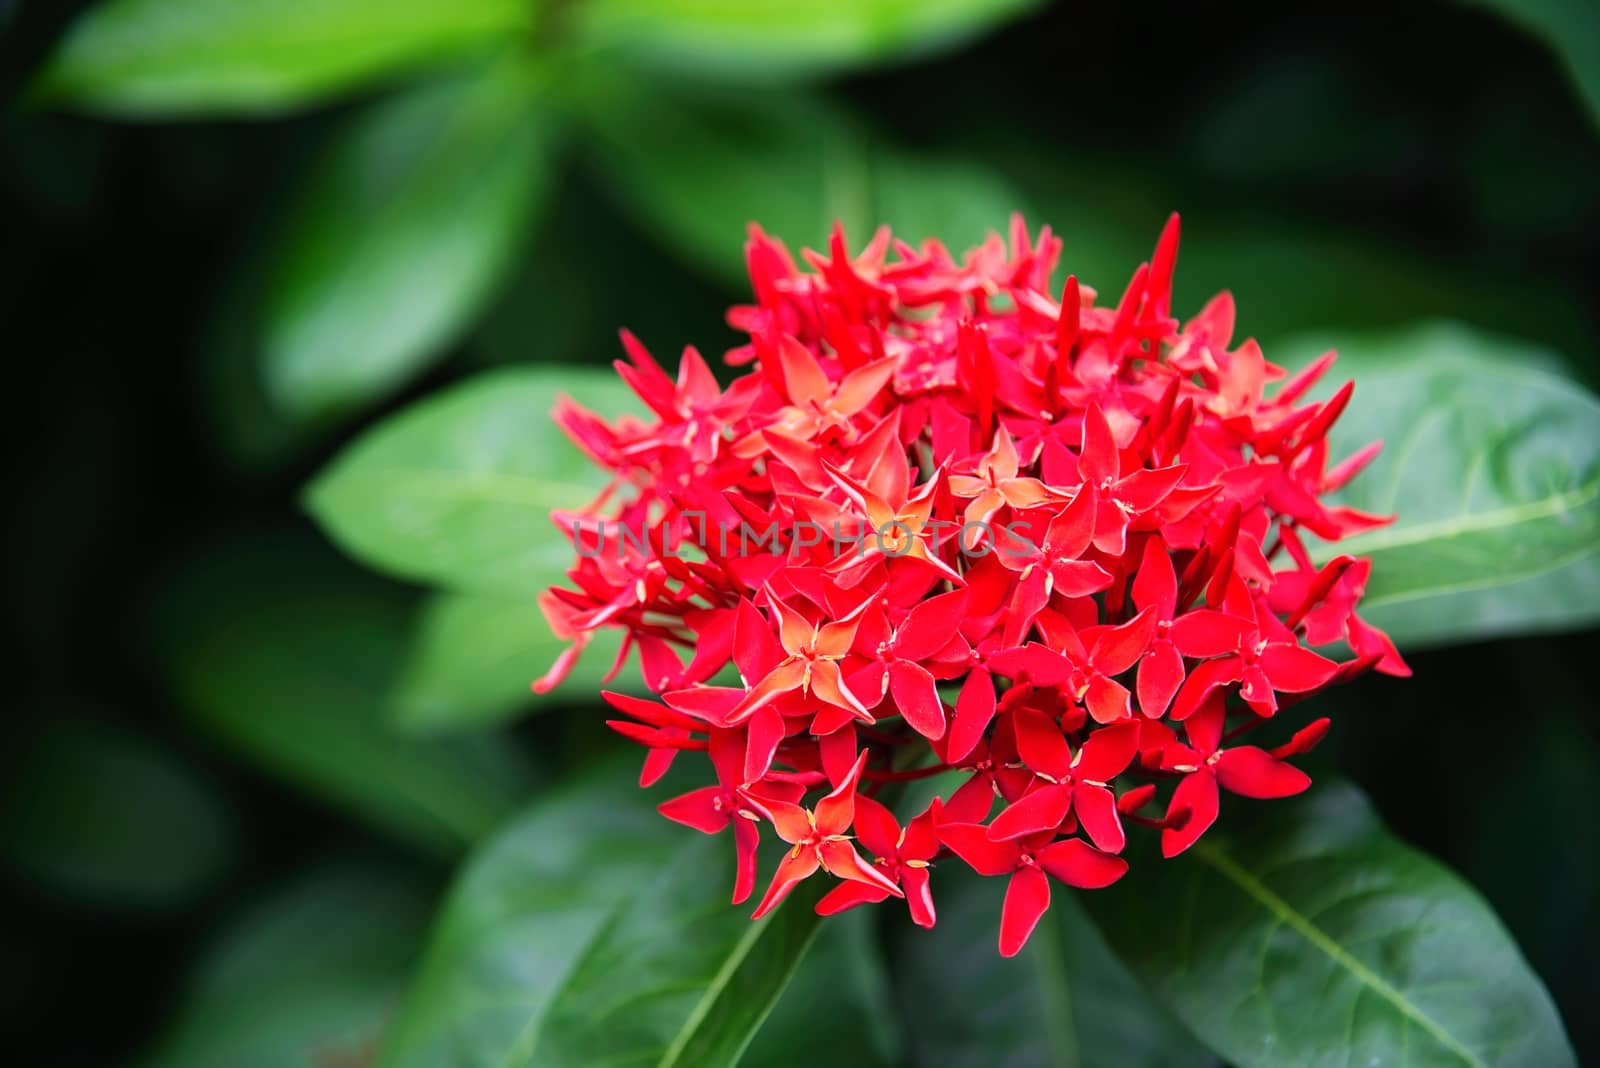 Fresh red flower called ixora with its green leave - beautiful red flower for background use by pairhandmade